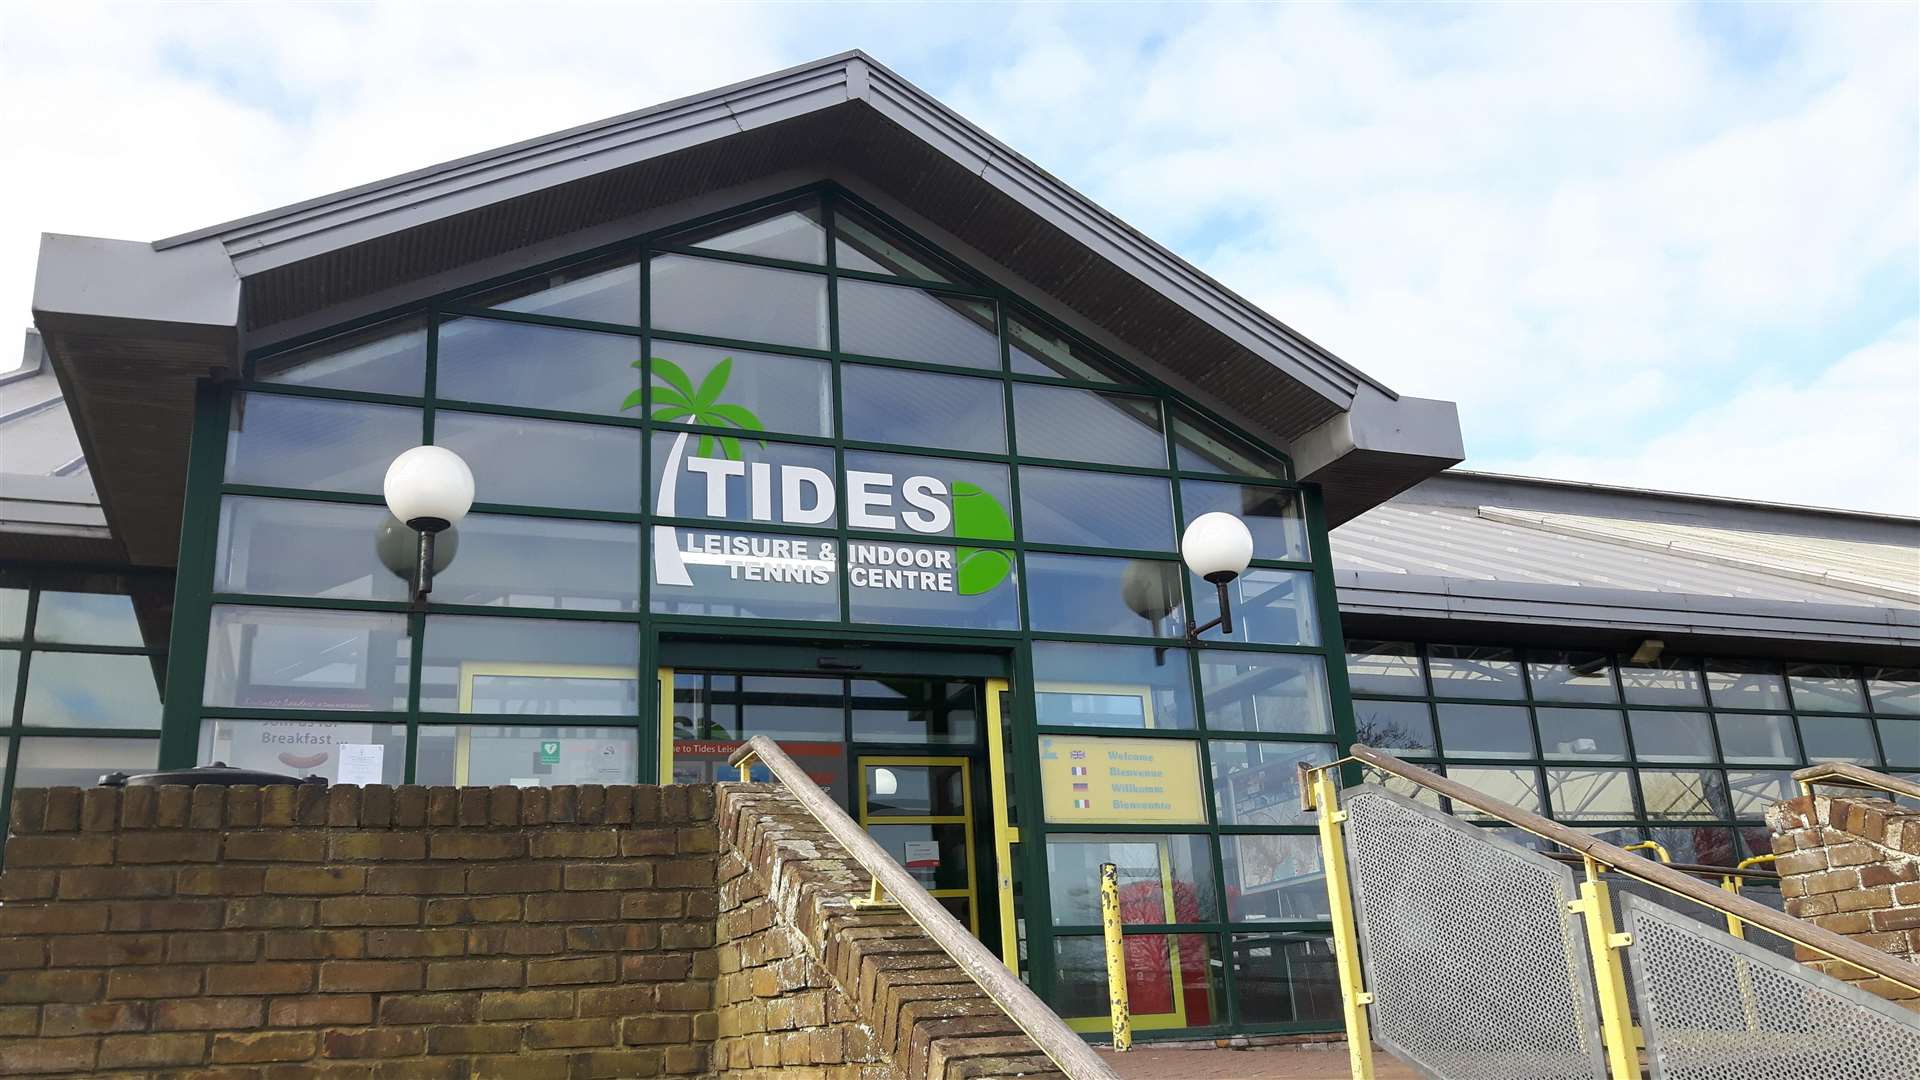 Tides Leisure Centre in Deal